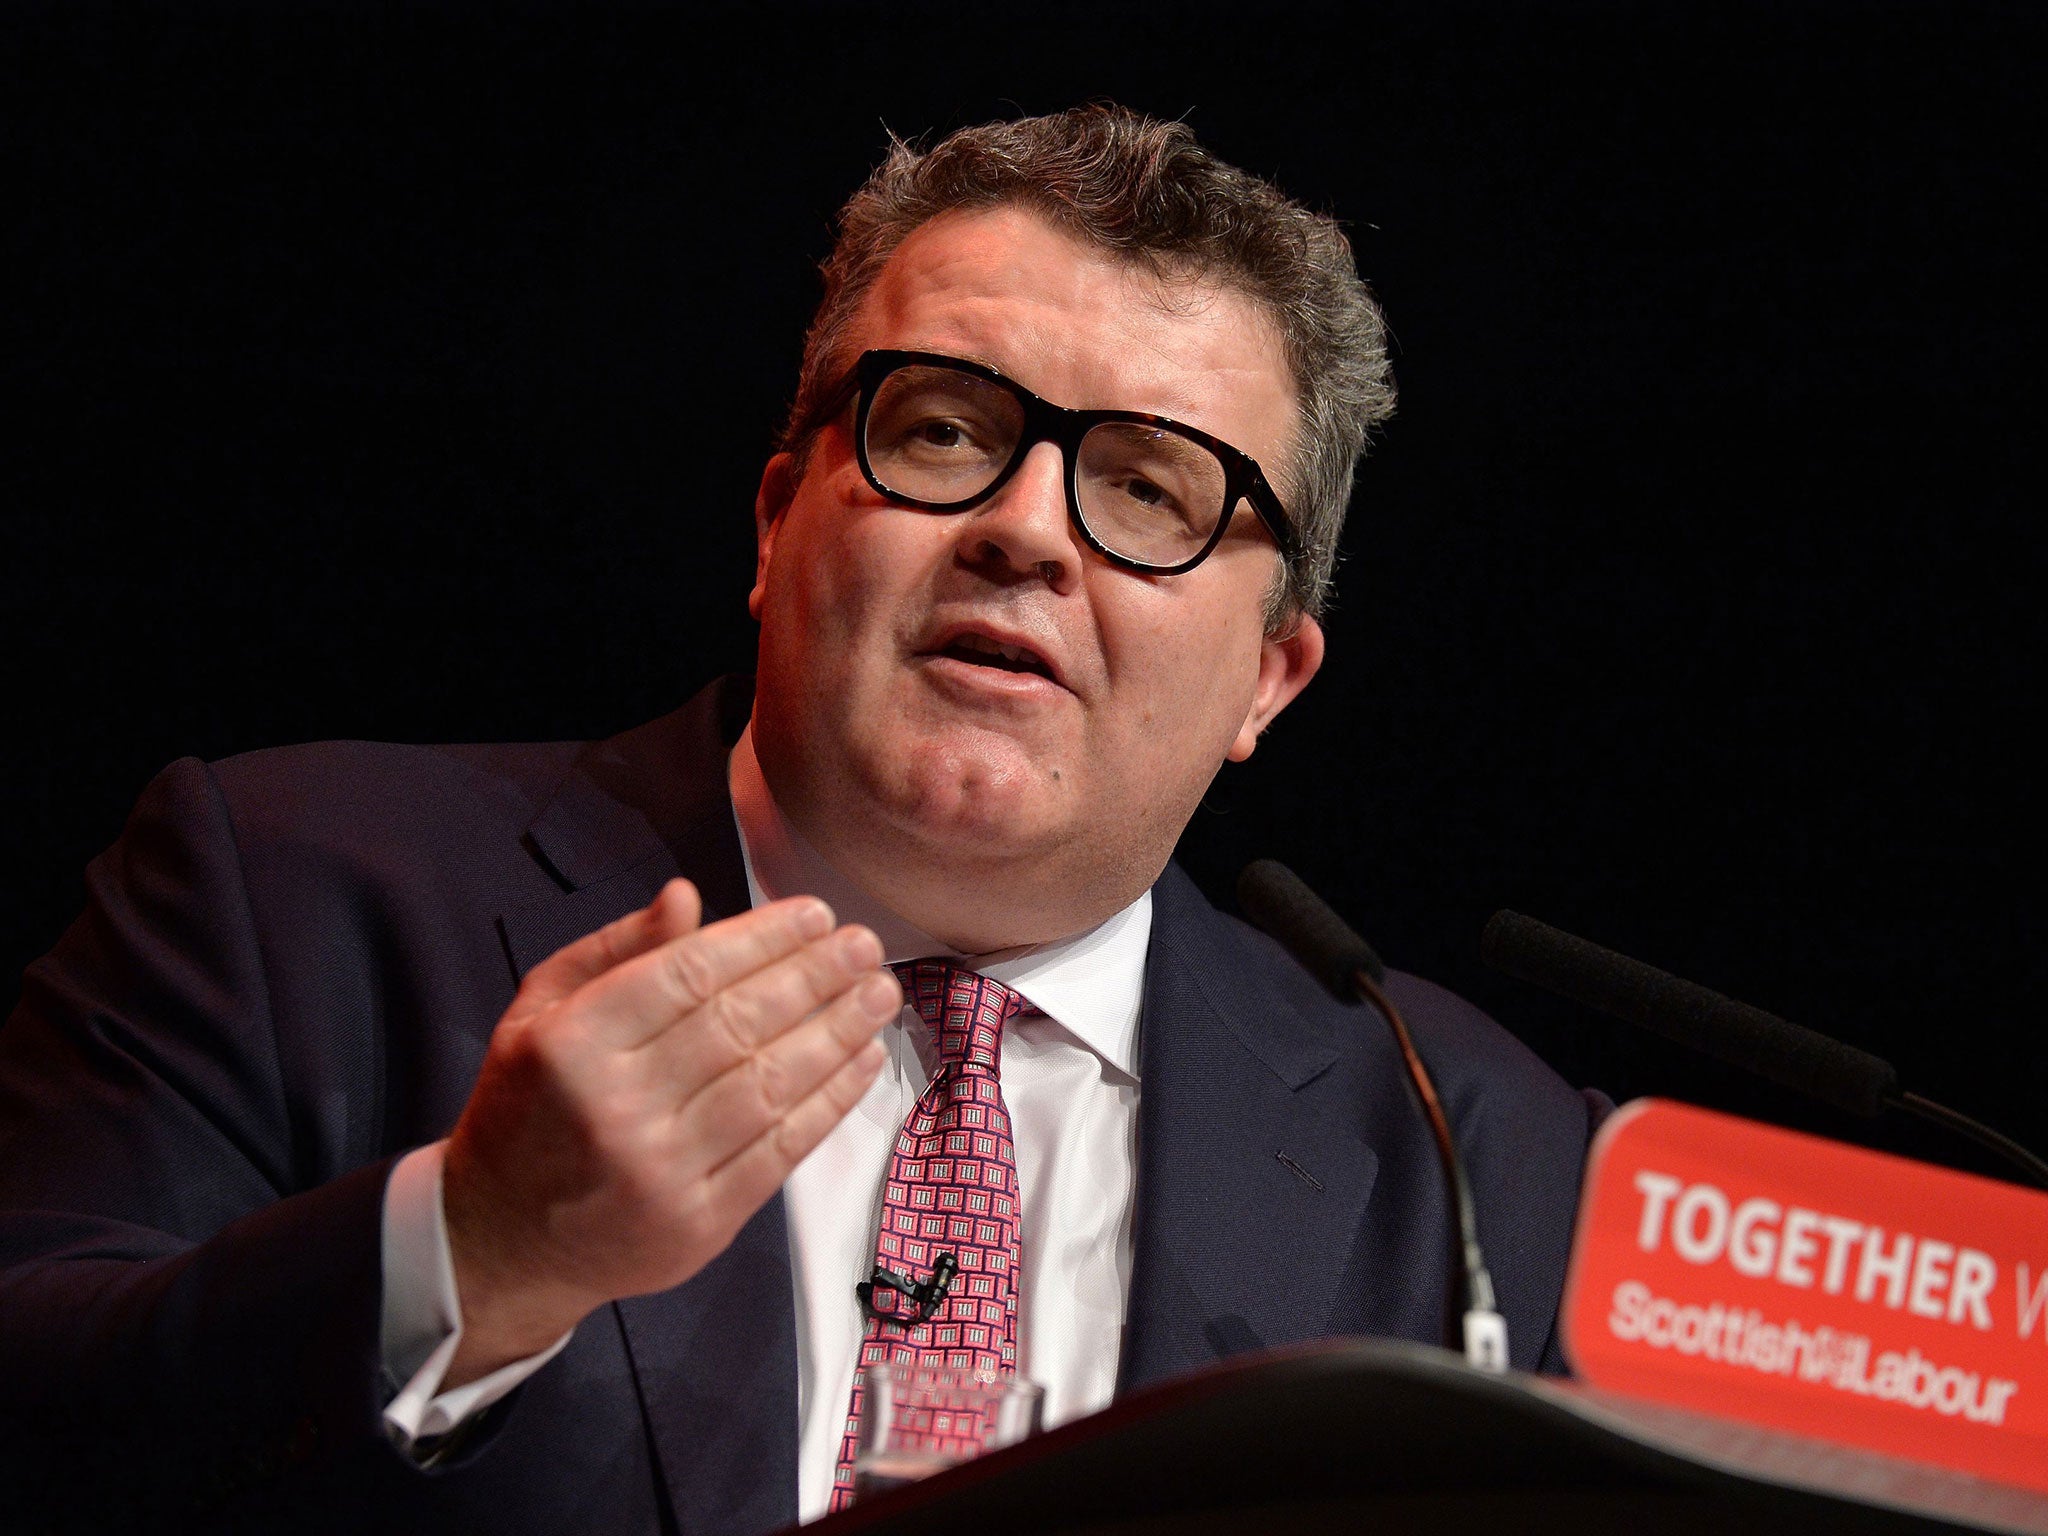 Tom Watson, deputy leader of the Labour Party, speaking at the Scottish Labour Party Conference in Perth on 25 February